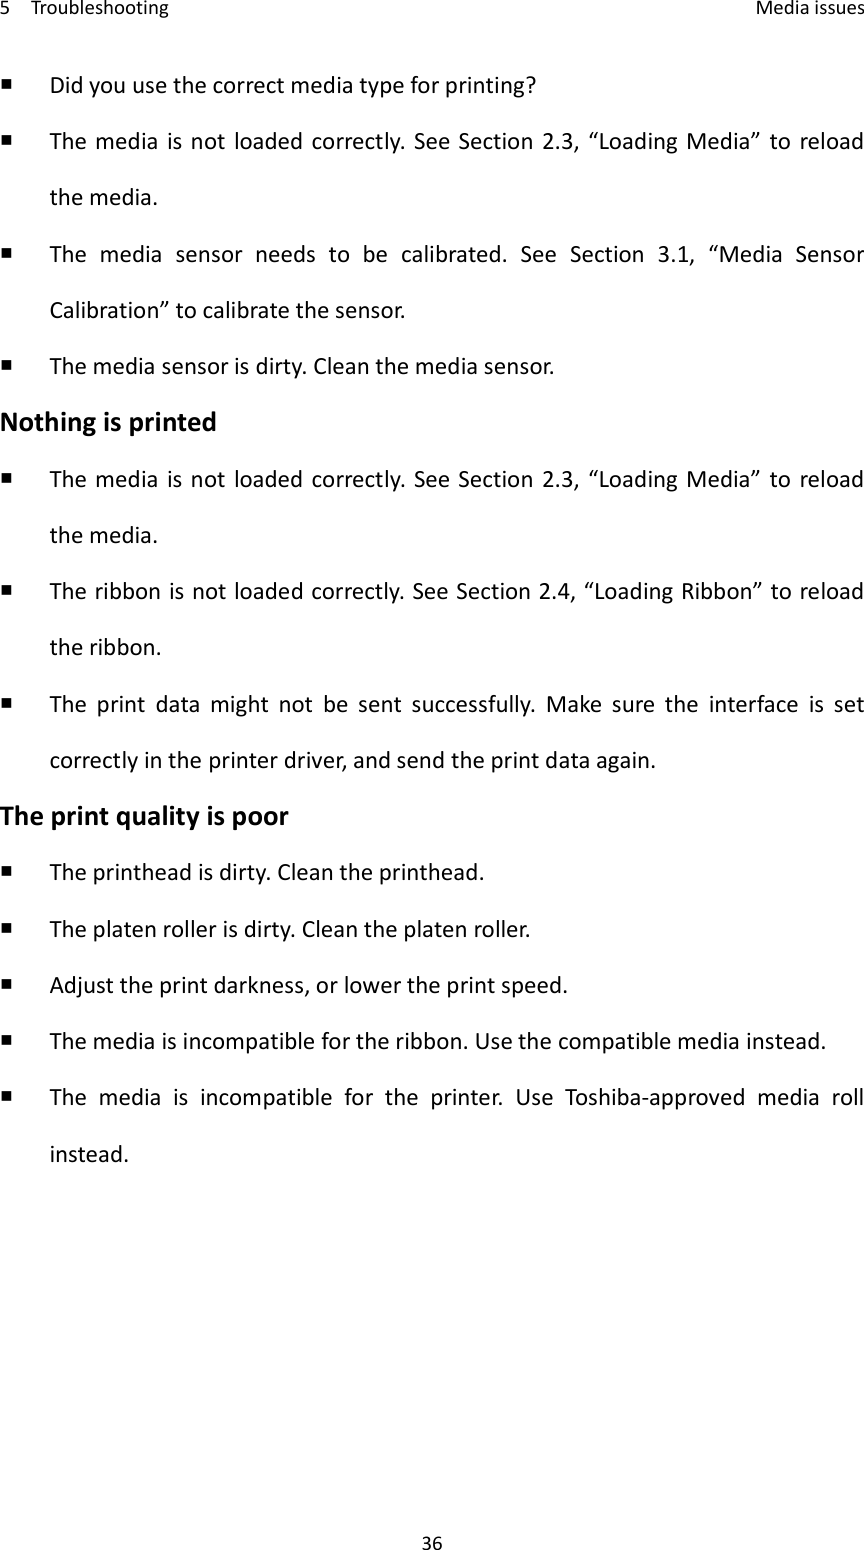 5    Troubleshooting    Media issues 36  Did you use the correct media type for printing?  The media  is not  loaded correctly. See Section 2.3, “Loading Media” to  reload the media.  The  media  sensor  needs  to  be  calibrated.  See  Section  3.1,  “Media  Sensor Calibration” to calibrate the sensor.  The media sensor is dirty. Clean the media sensor. Nothing is printed  The media  is not  loaded correctly. See Section  2.3, “Loading Media” to  reload the media.  The ribbon is not loaded correctly. See Section 2.4, “Loading Ribbon” to reload the ribbon.  The  print  data  might  not  be  sent  successfully.  Make  sure  the  interface  is  set correctly in the printer driver, and send the print data again. The print quality is poor  The printhead is dirty. Clean the printhead.  The platen roller is dirty. Clean the platen roller.  Adjust the print darkness, or lower the print speed.  The media is incompatible for the ribbon. Use the compatible media instead.  The  media  is  incompatible  for  the  printer.  Use  Toshiba-approved  media  roll instead.  